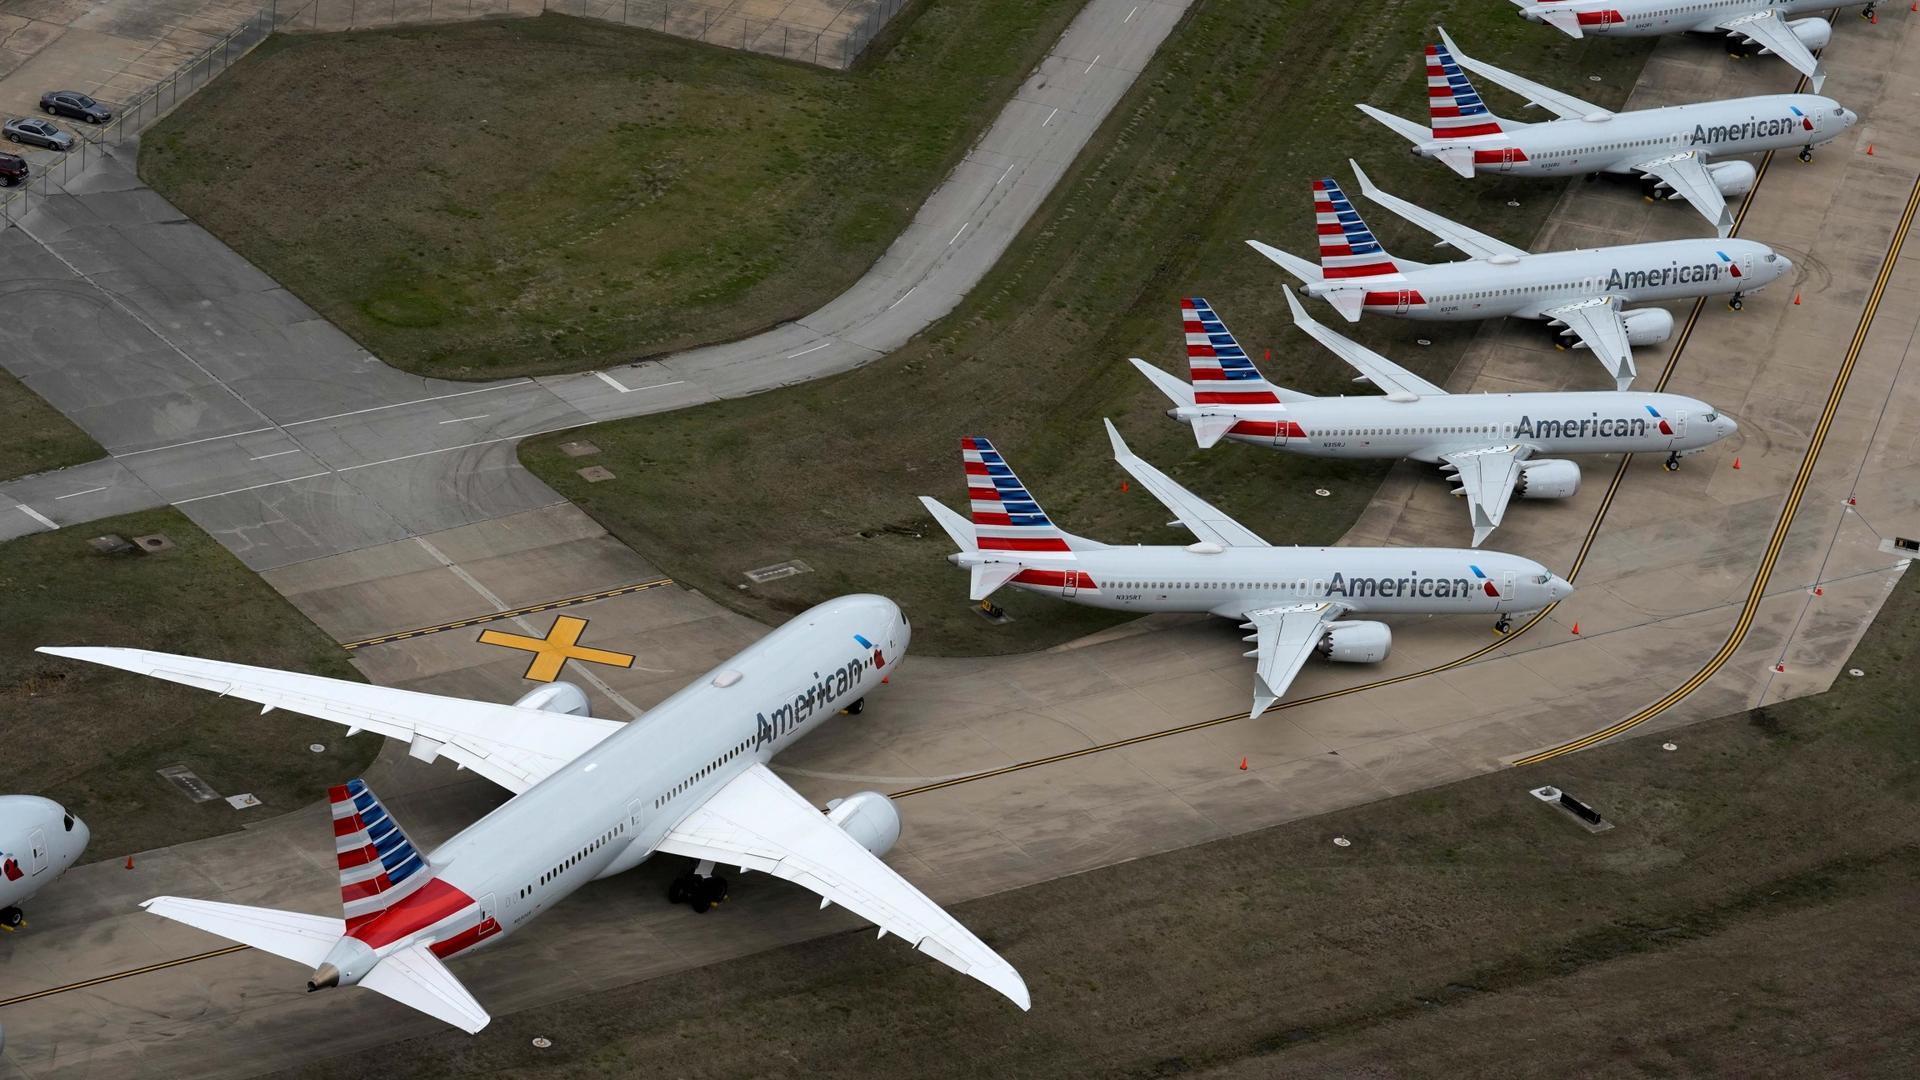 American Airlines passenger planes parked due to flight reductions made to slow the spread of coronavirus disease (COVID-19), at Tulsa International Airport in Tulsa, Oklahoma, on March 23, 2020.